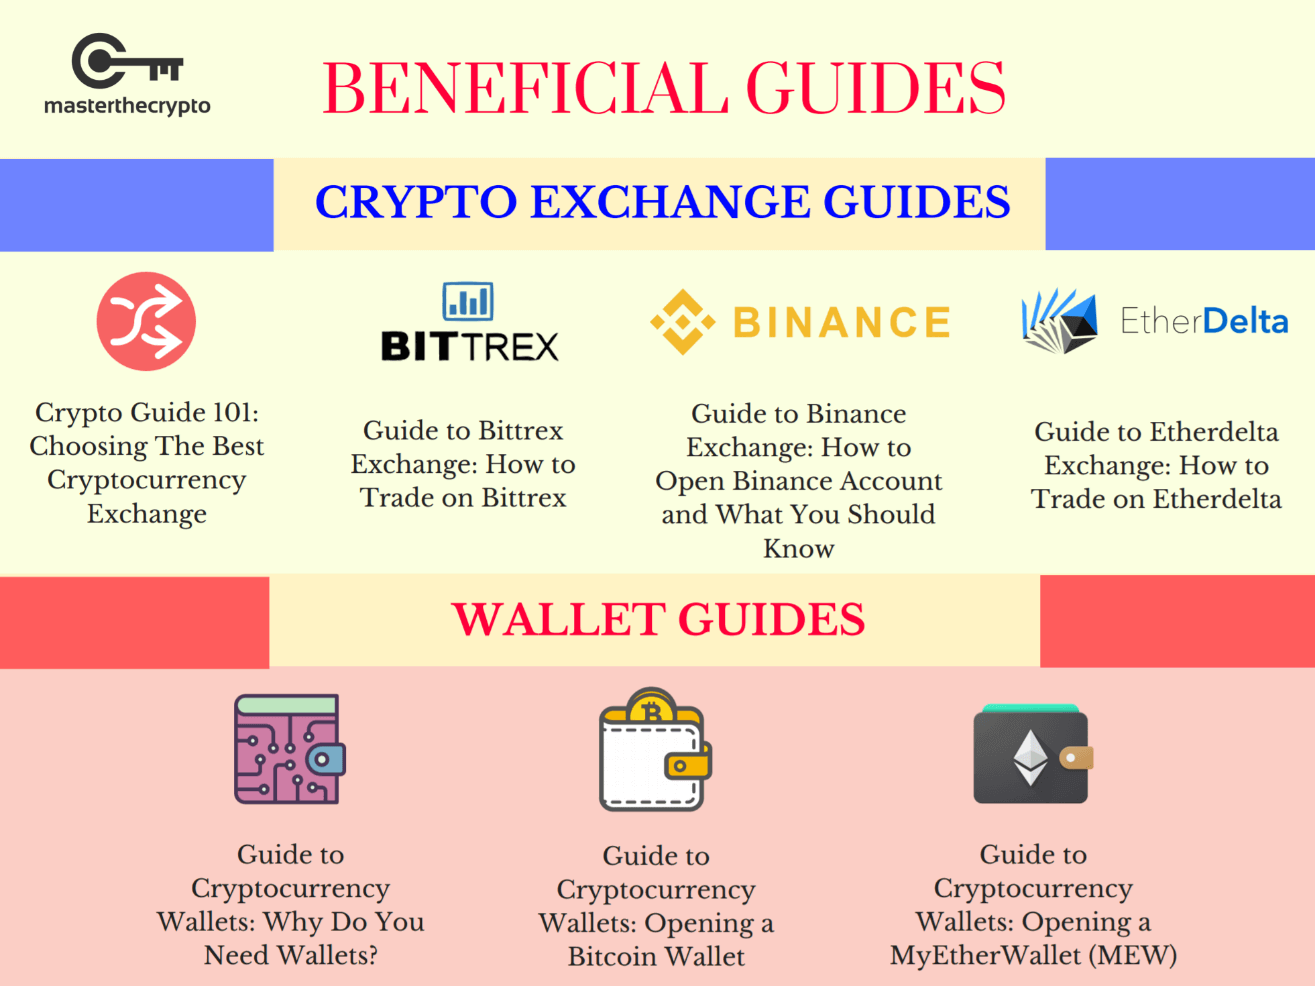 Best Chart Indicators For Cryptocurrency